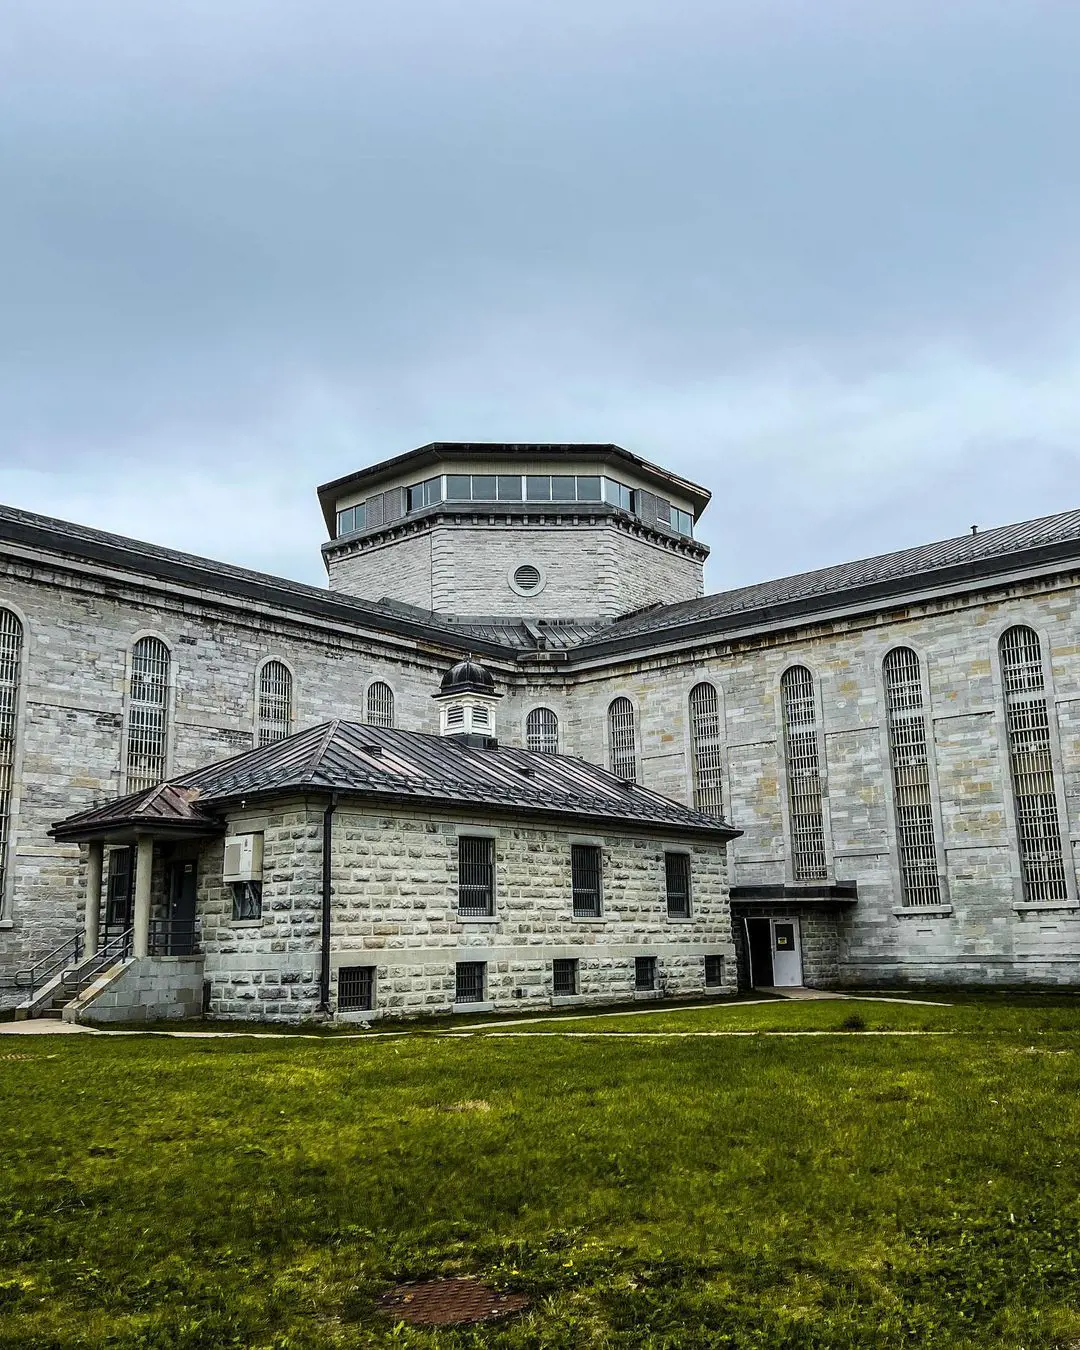 Kingston Penitentiary is the central location for filming the series